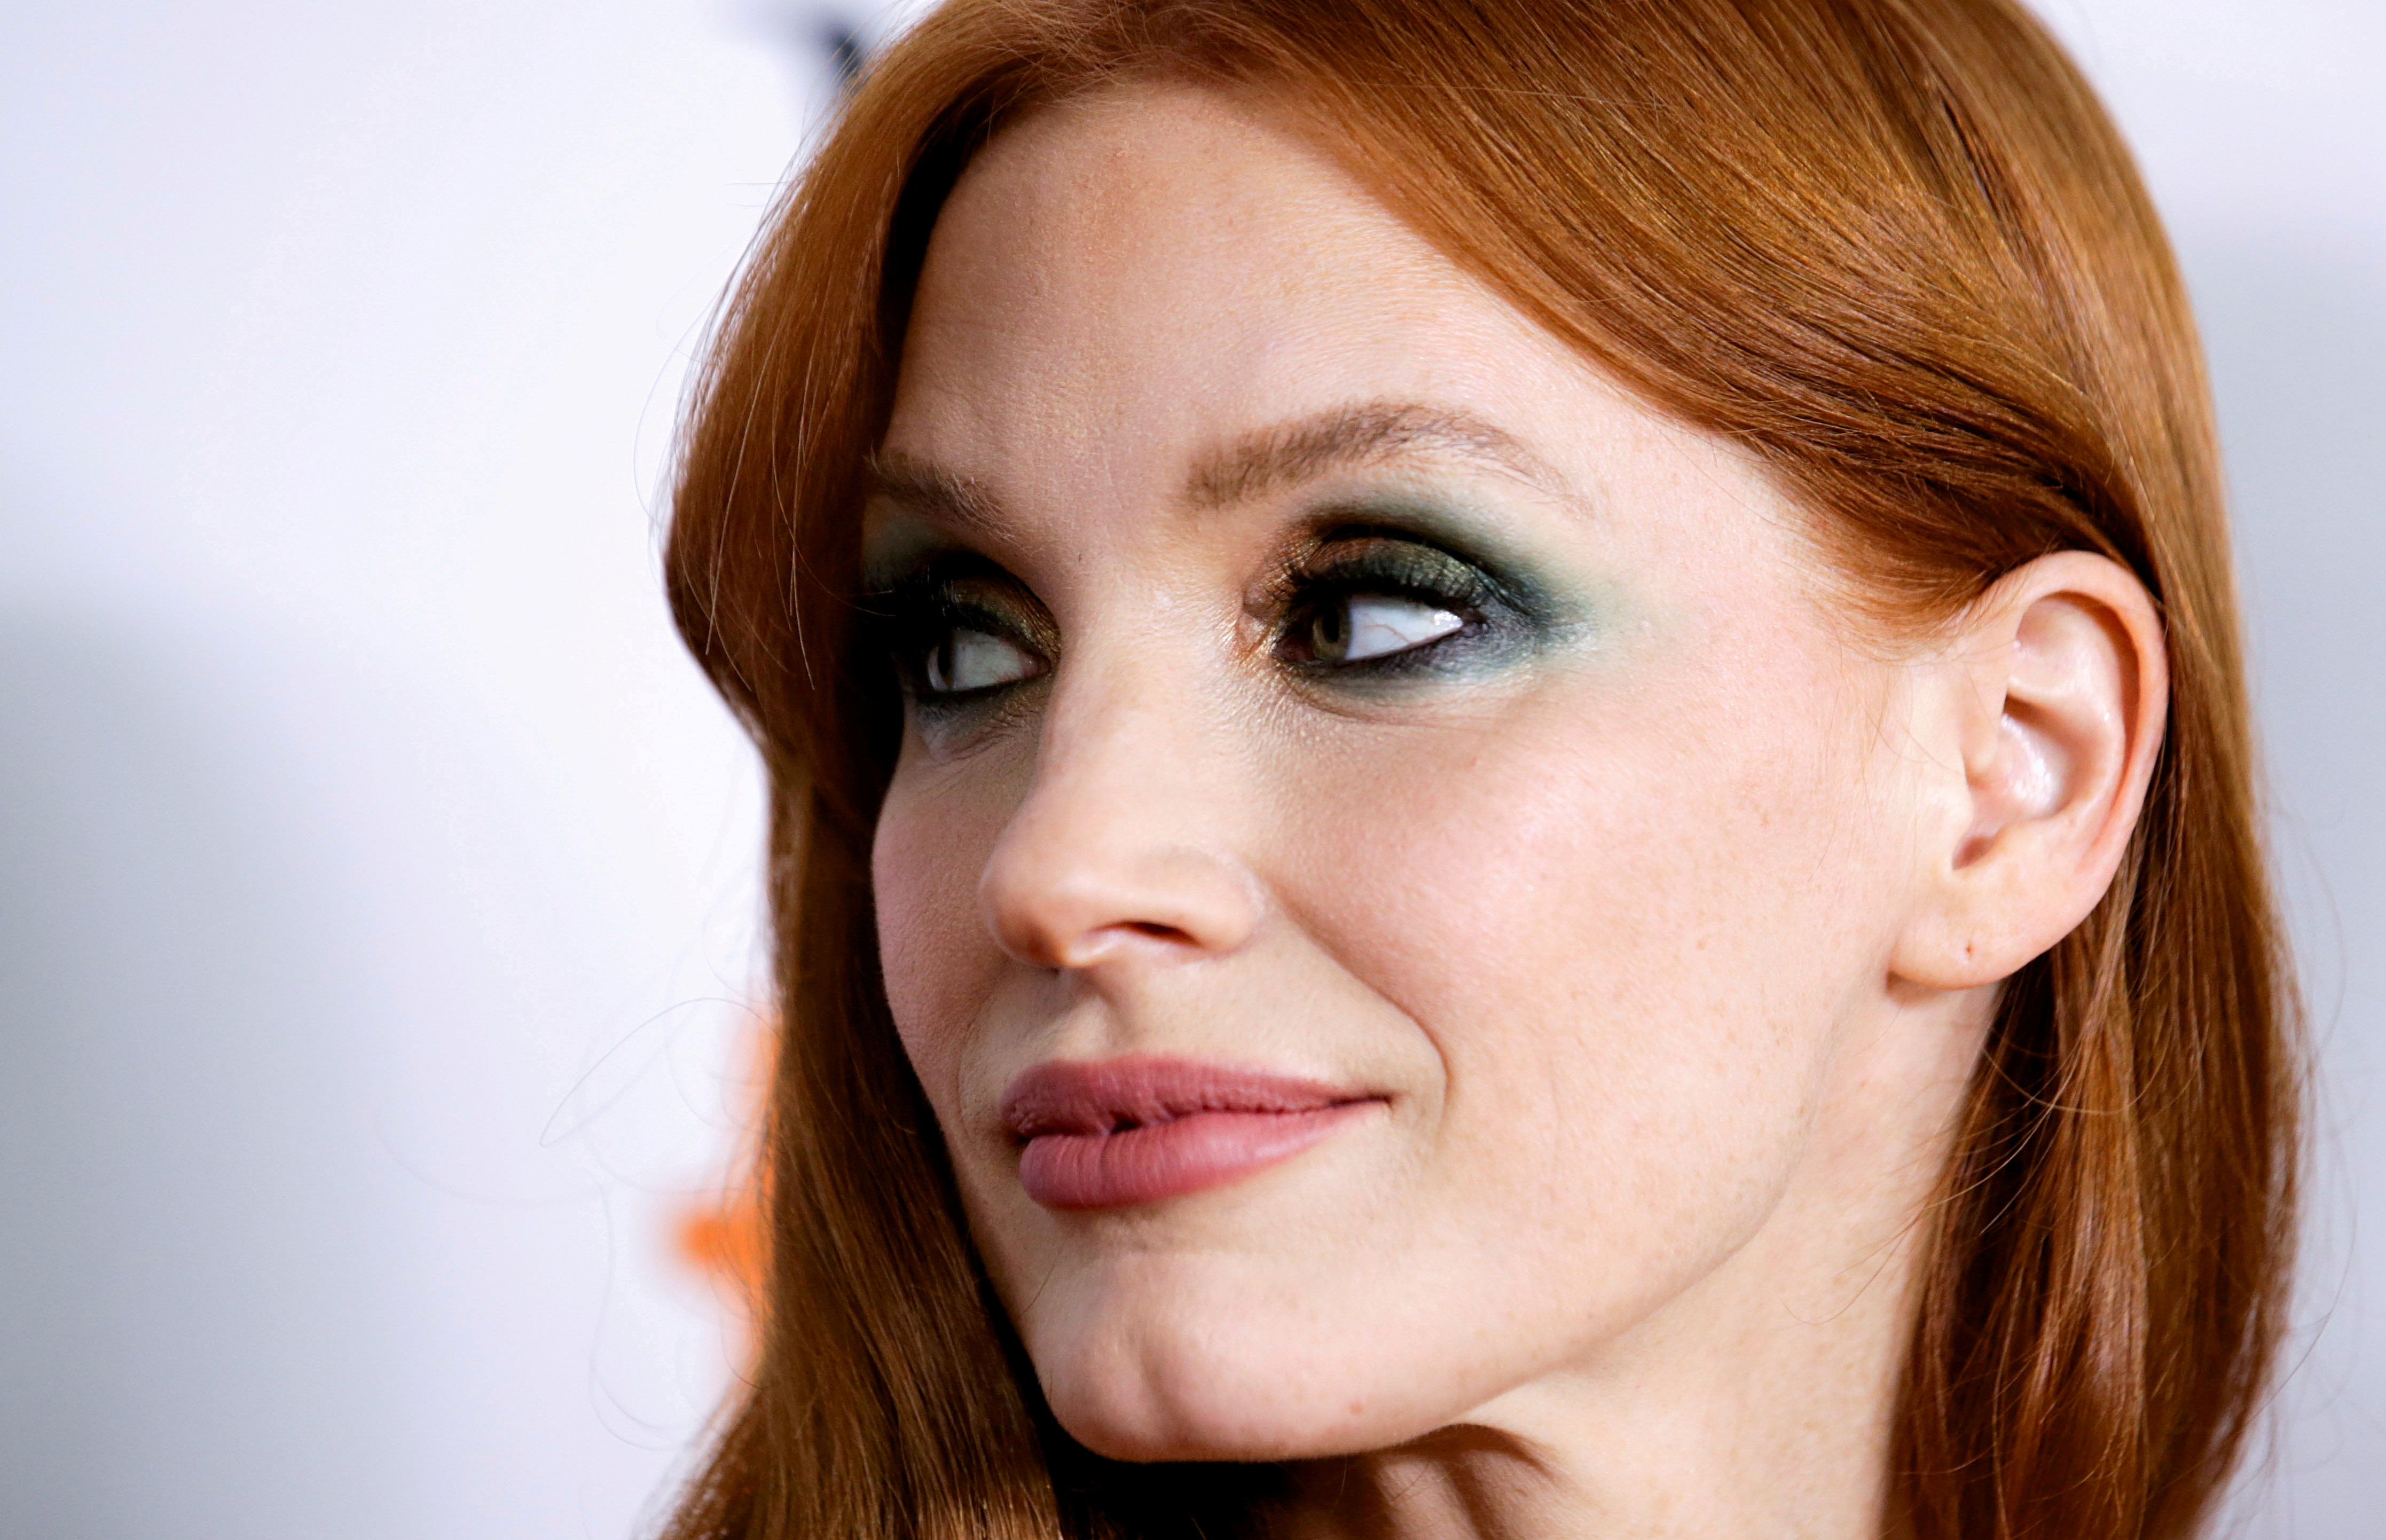 Jessica Chastain The Eyes Of Tammy Faye Movie Wallpapers